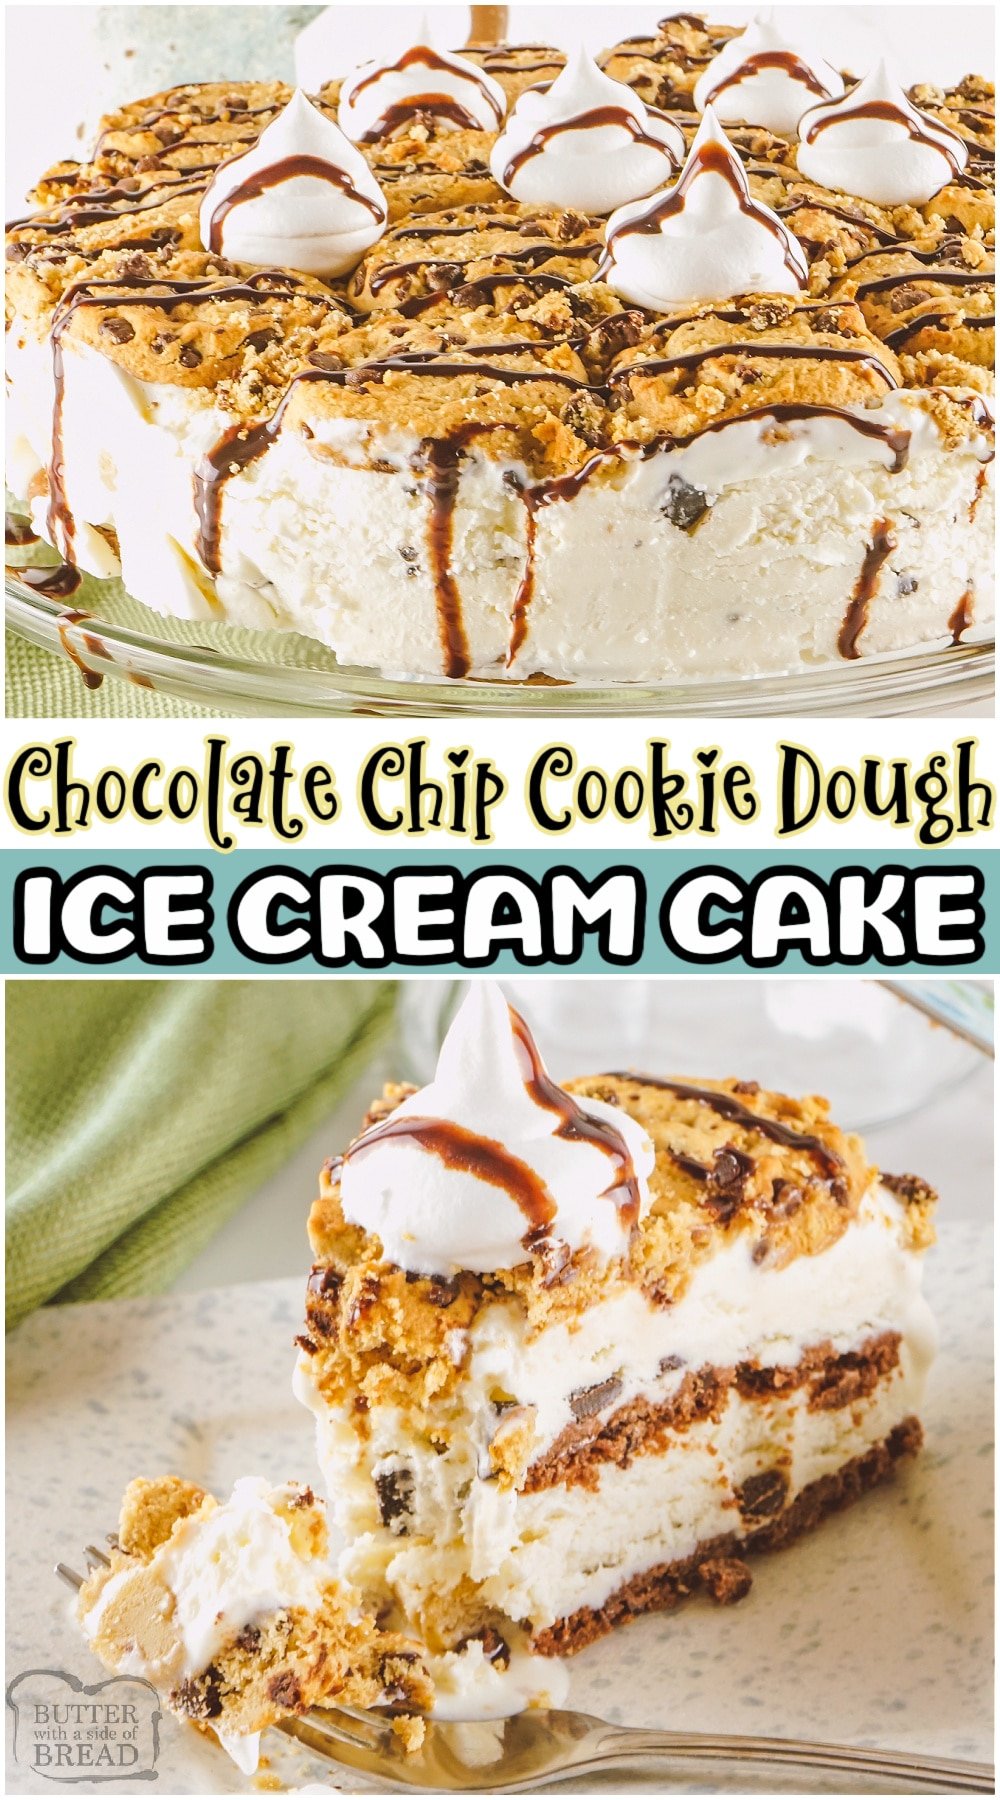 Chocolate Chip cookies & cookie dough combine in this fantastic Ice Cream Cake that everyone loves! Simple, 5 ingredient recipe that yields a spectacular cake perfect for chocolate chip cookie dough lovers!